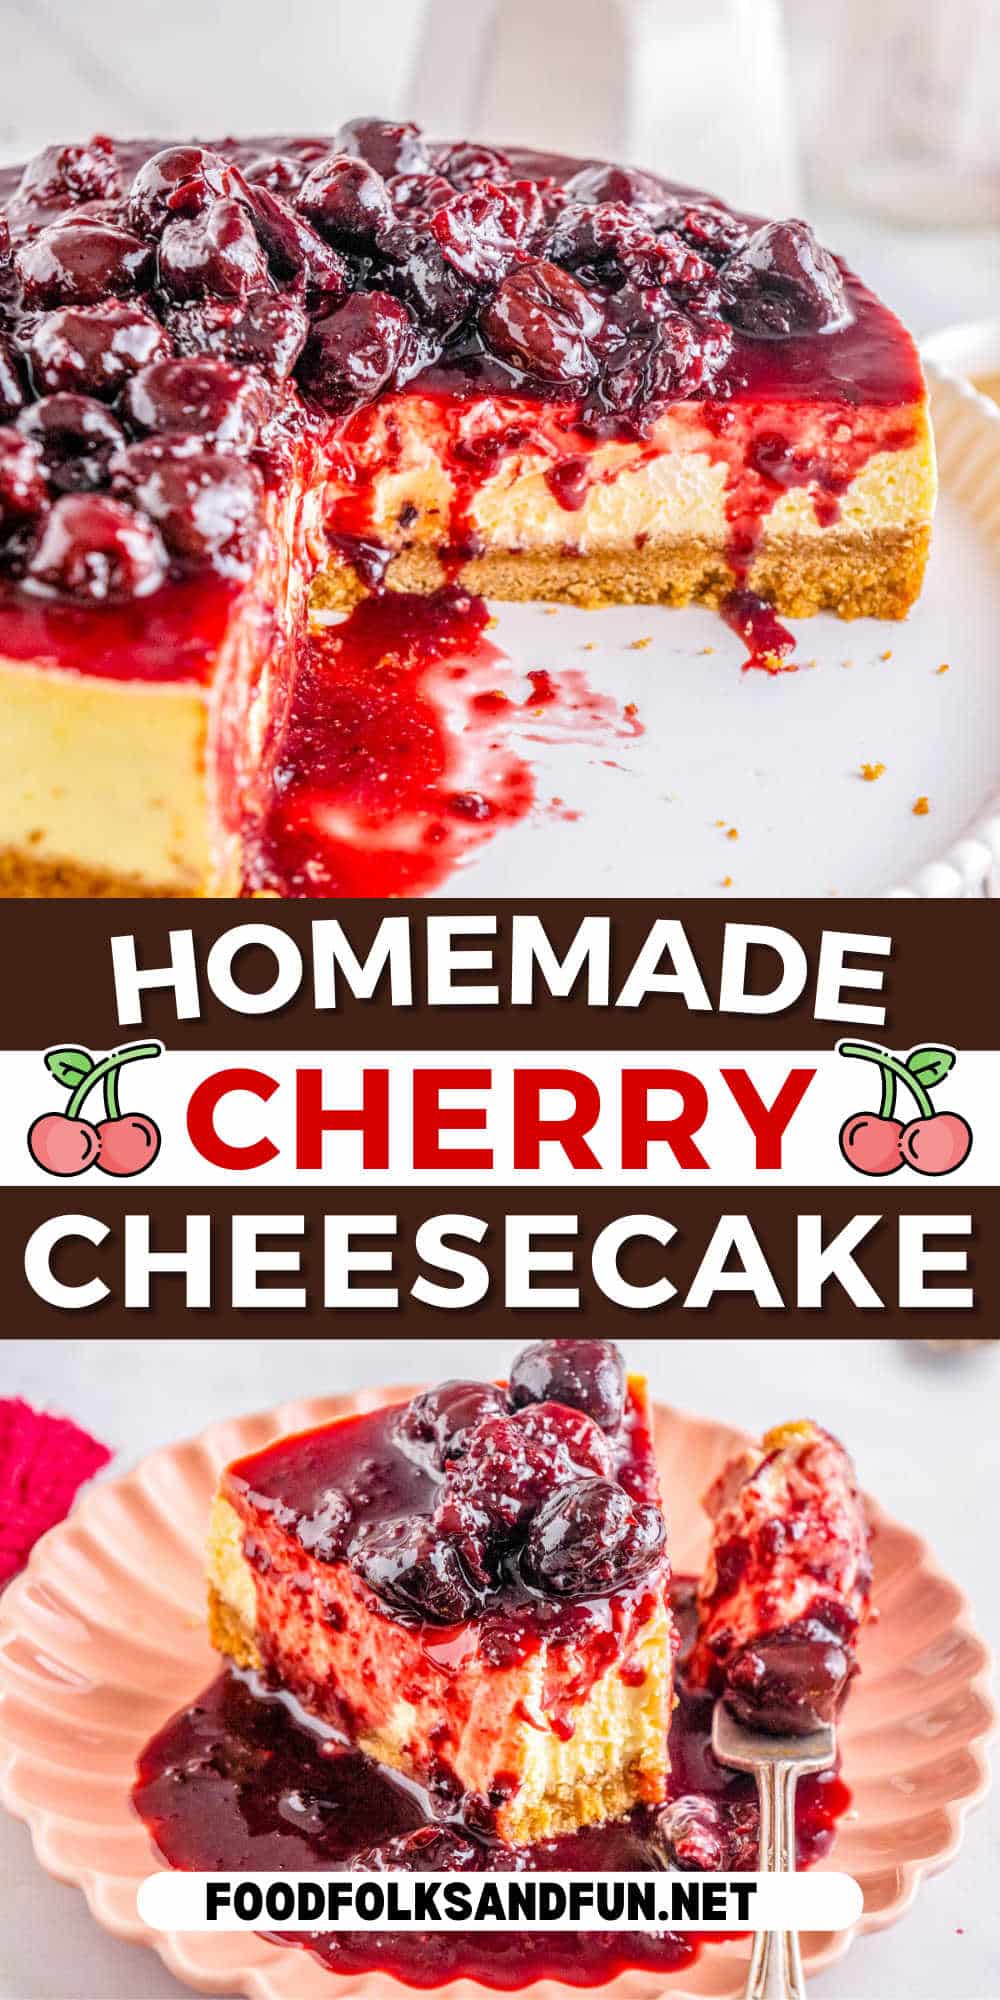 This Homemade Cherry Cheesecake is velvety smooth, creamy, and rich. It has a buttery crust and is topped with a sweet yet tart cherry sauce.  via @foodfolksandfun